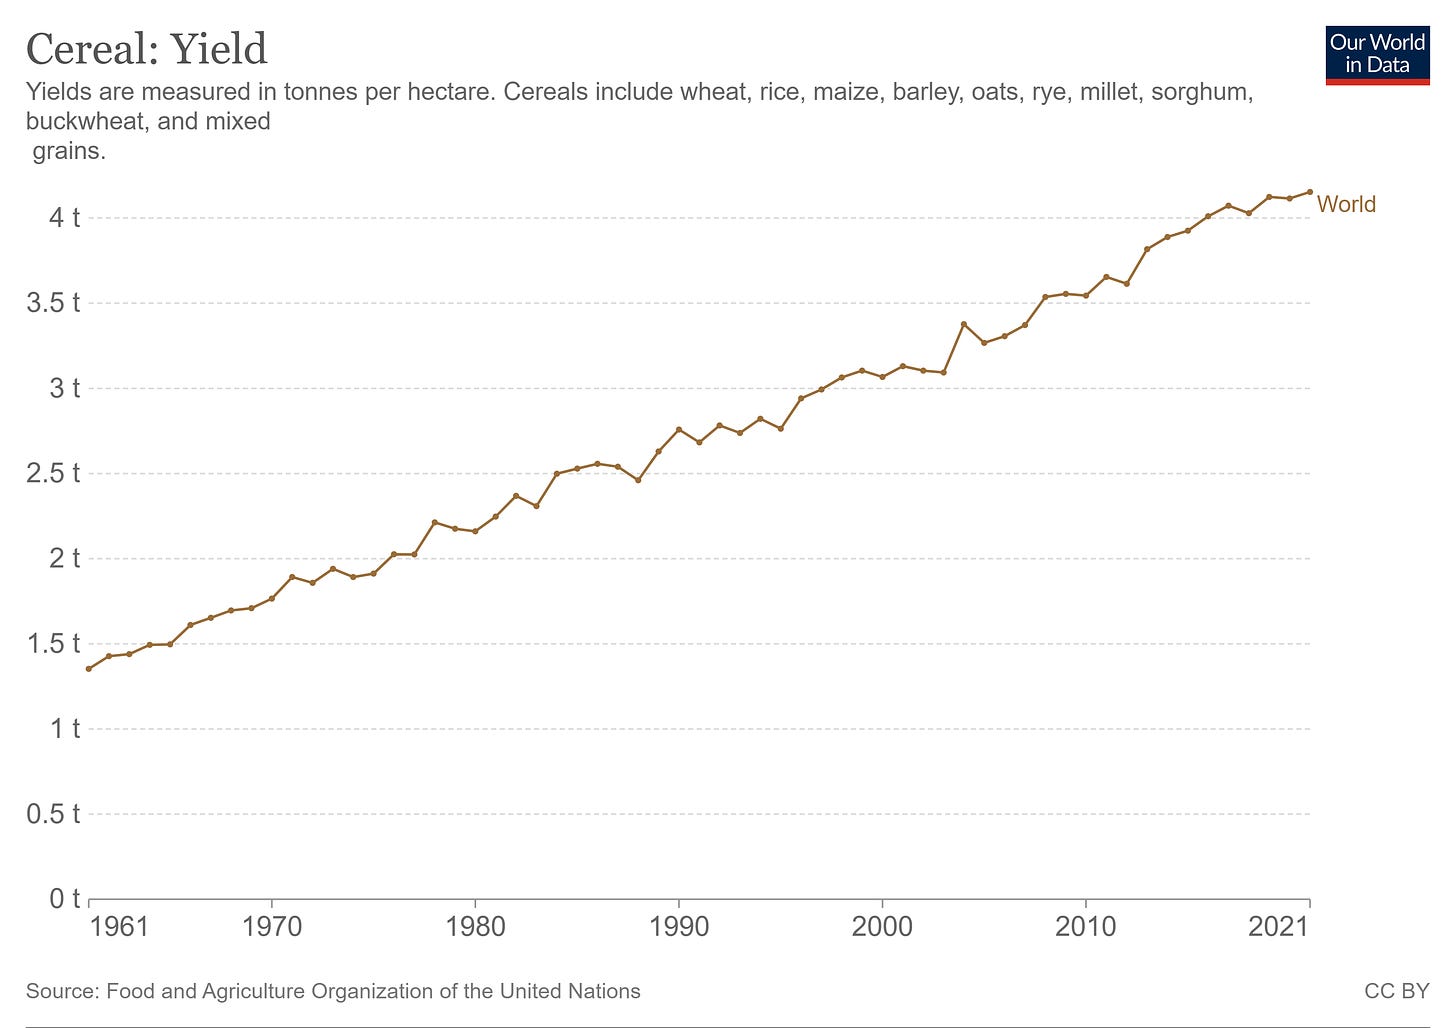 Figure 8 - Global Cereal Yields since 1961